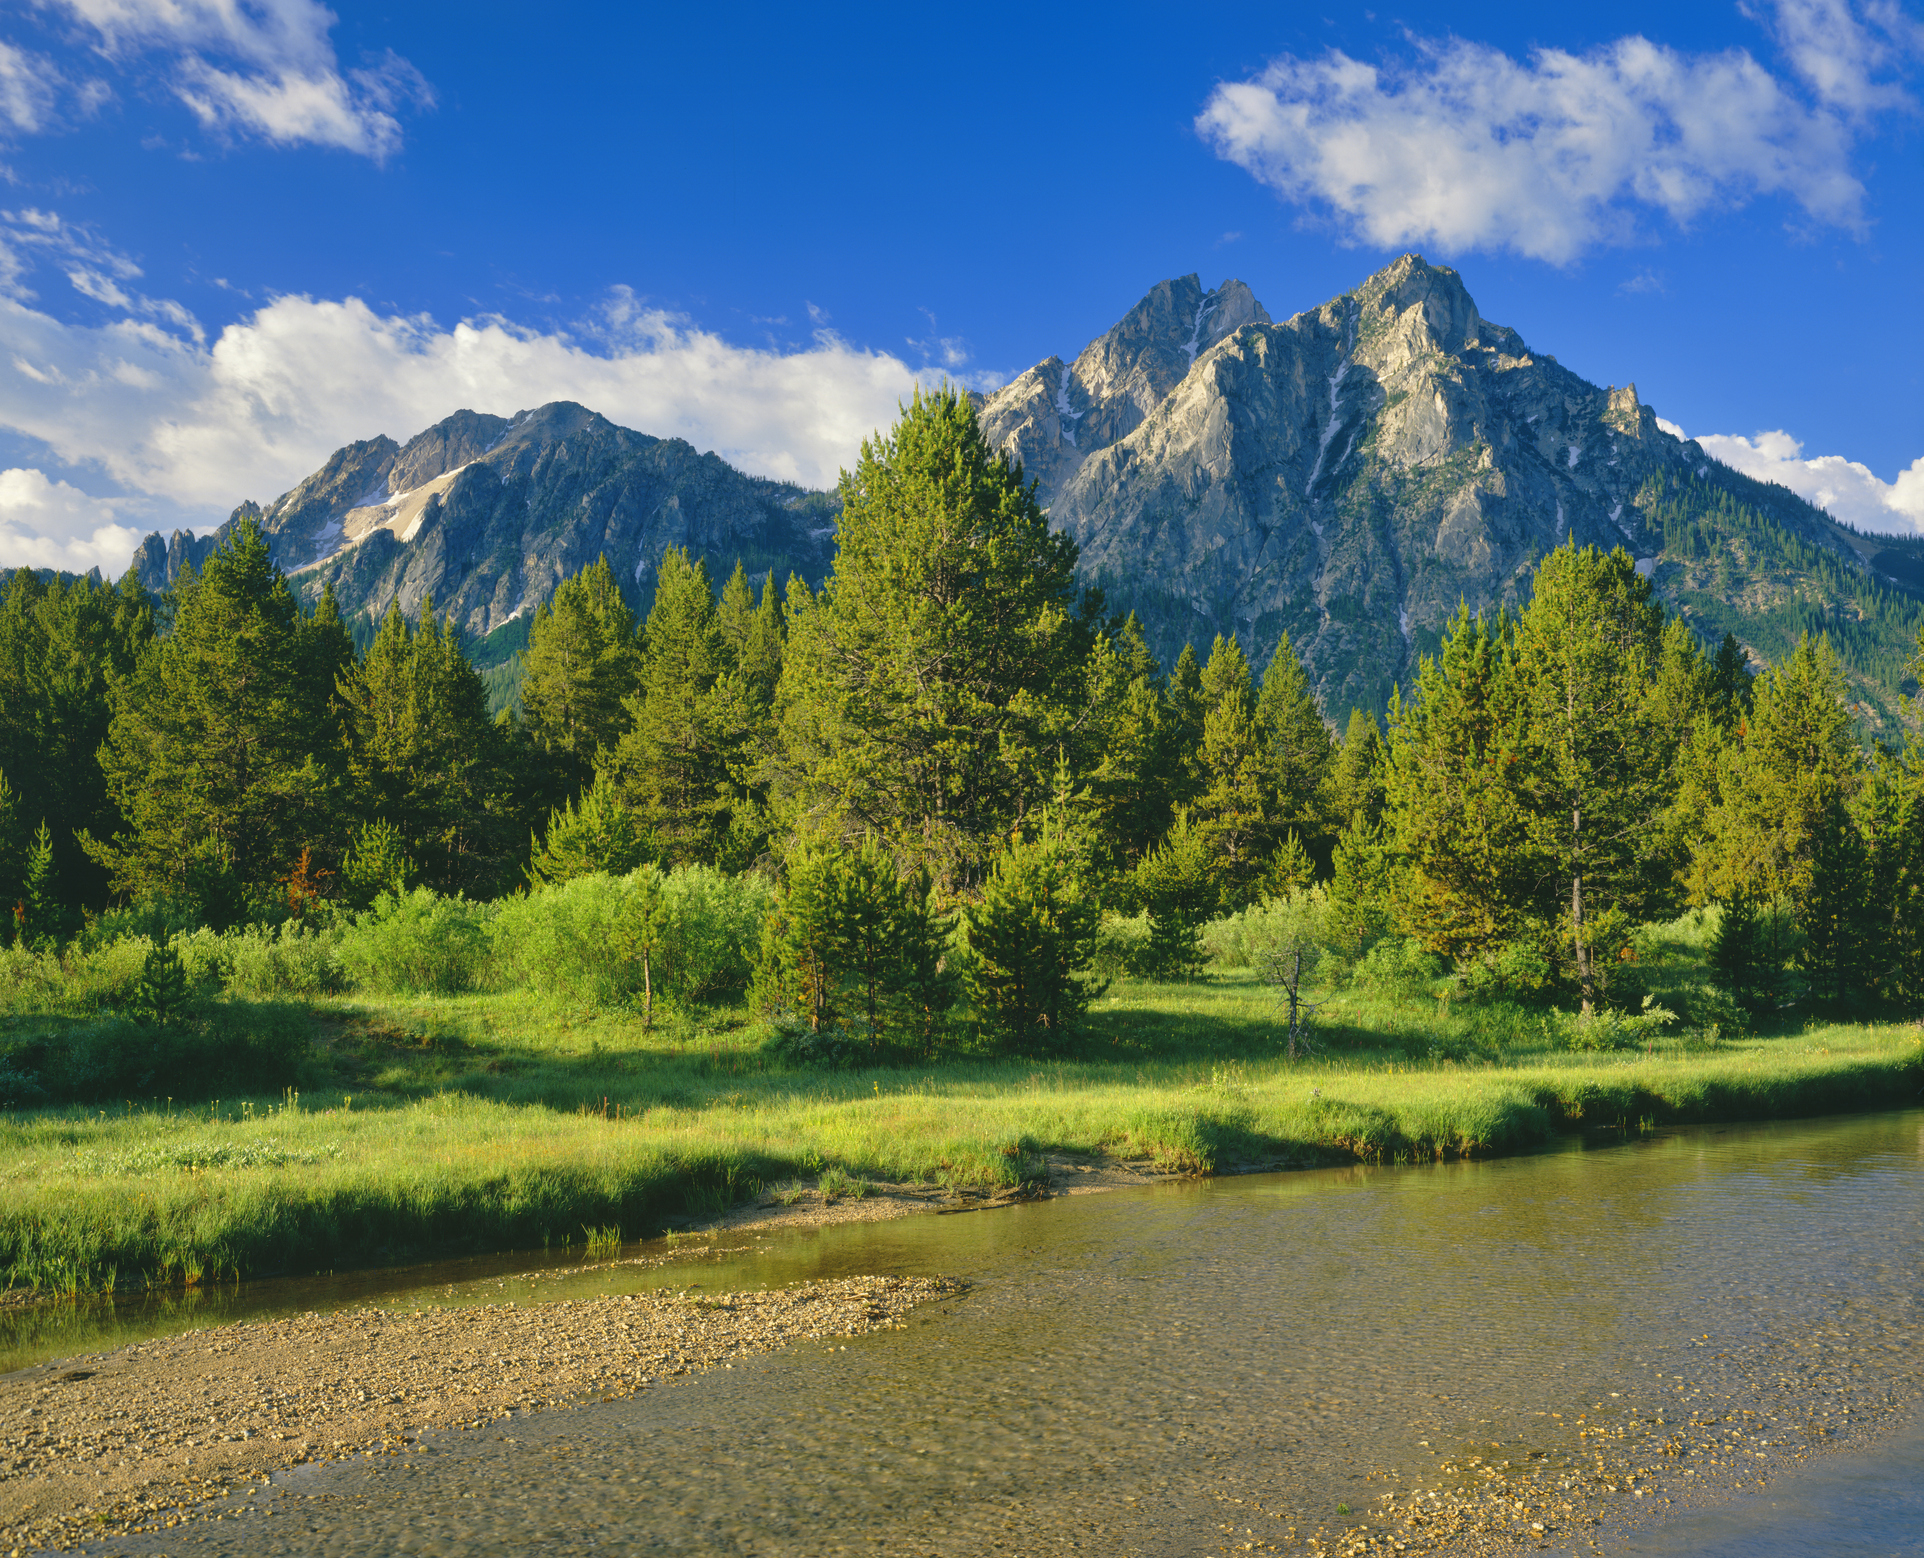 The Sawtooth Range sits in the distance in  a meadow, in the Sawtooth National Recreation Area of Stanley, Idaho.